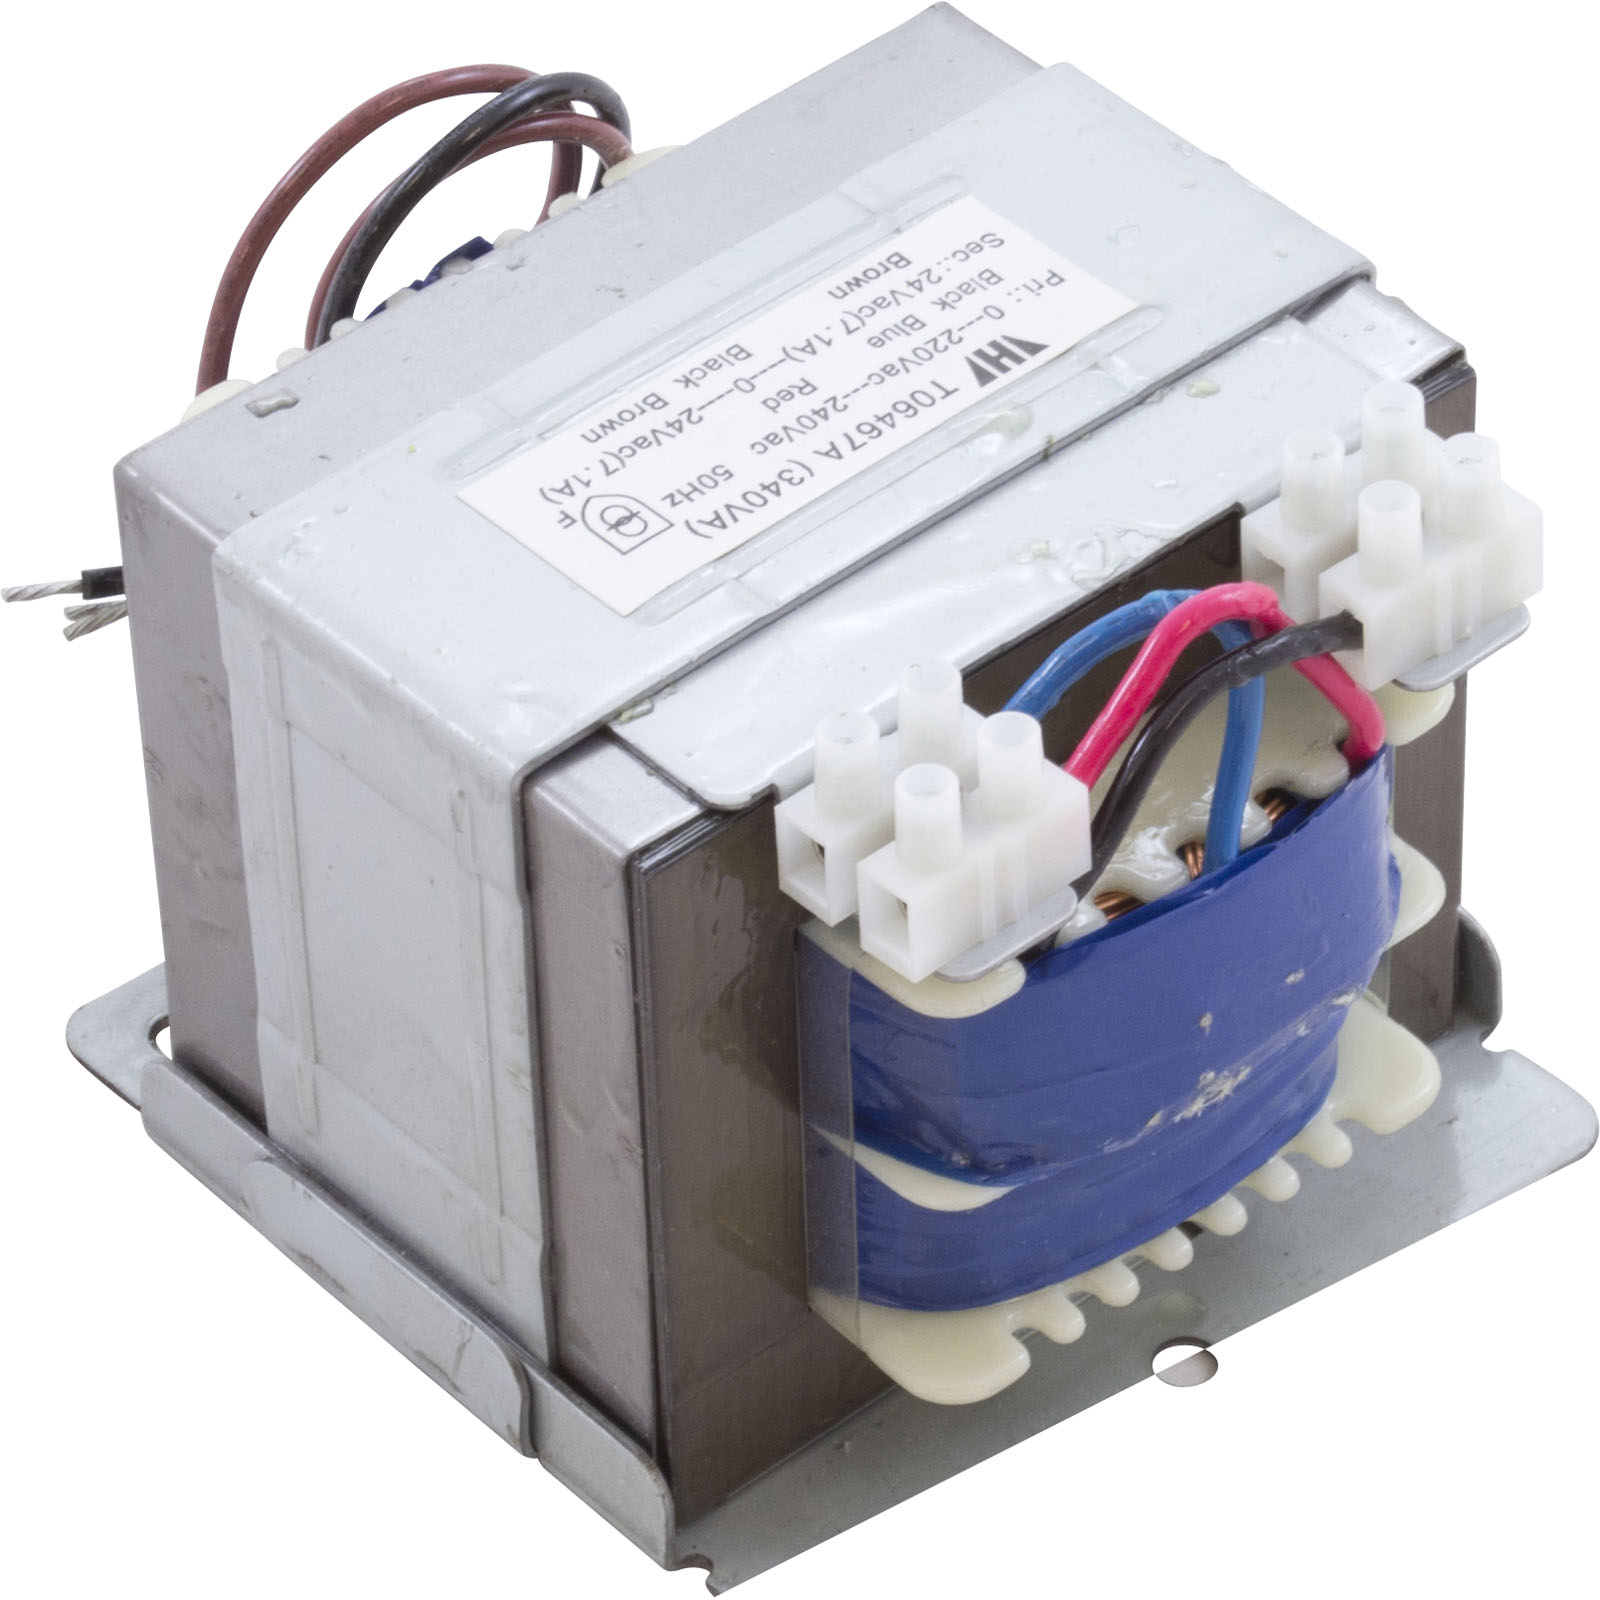 Picture of Transformer, Zodiac, Clearwater LM2-40, LM3-40, 230v, 16.5v